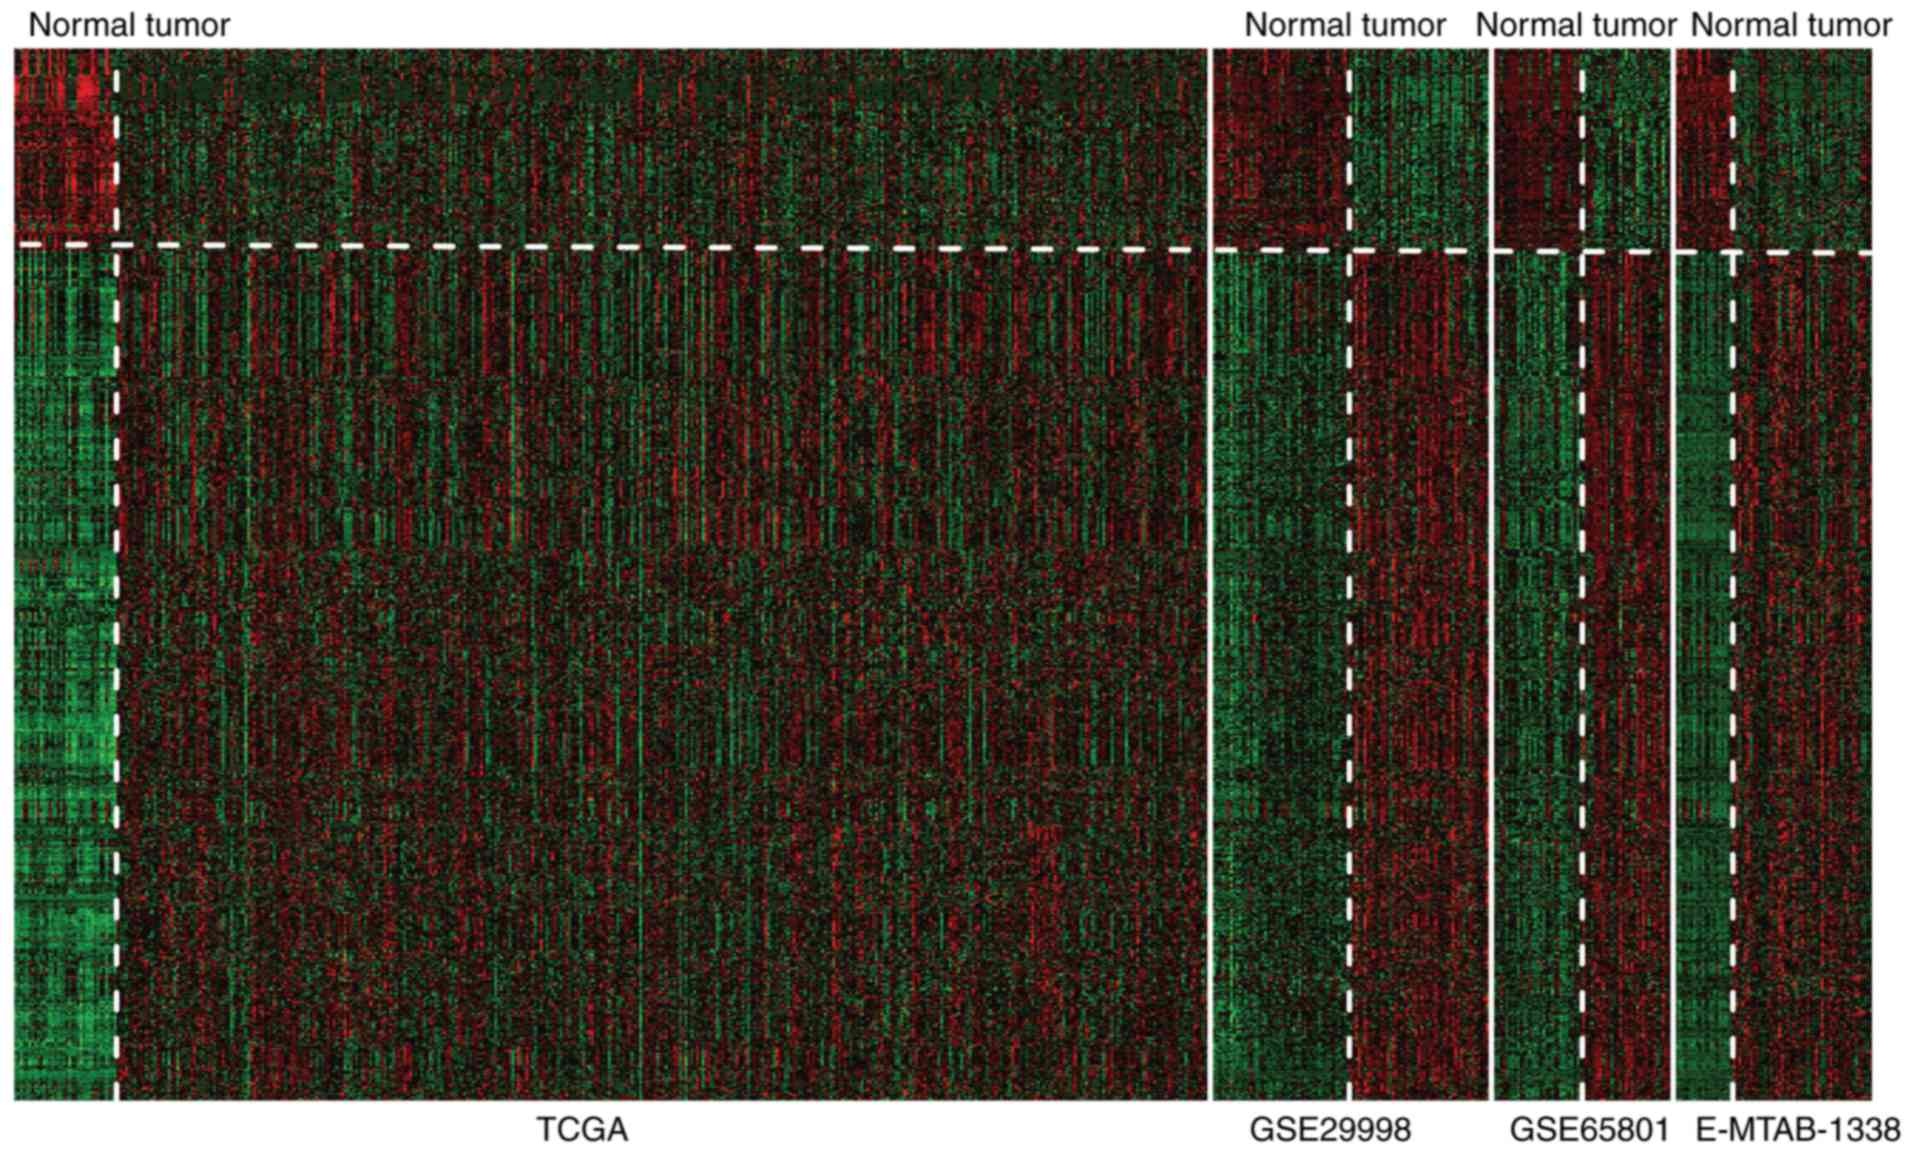 LASSO‑based Cox‑PH model identifies an 11‑lncRNA signature for 